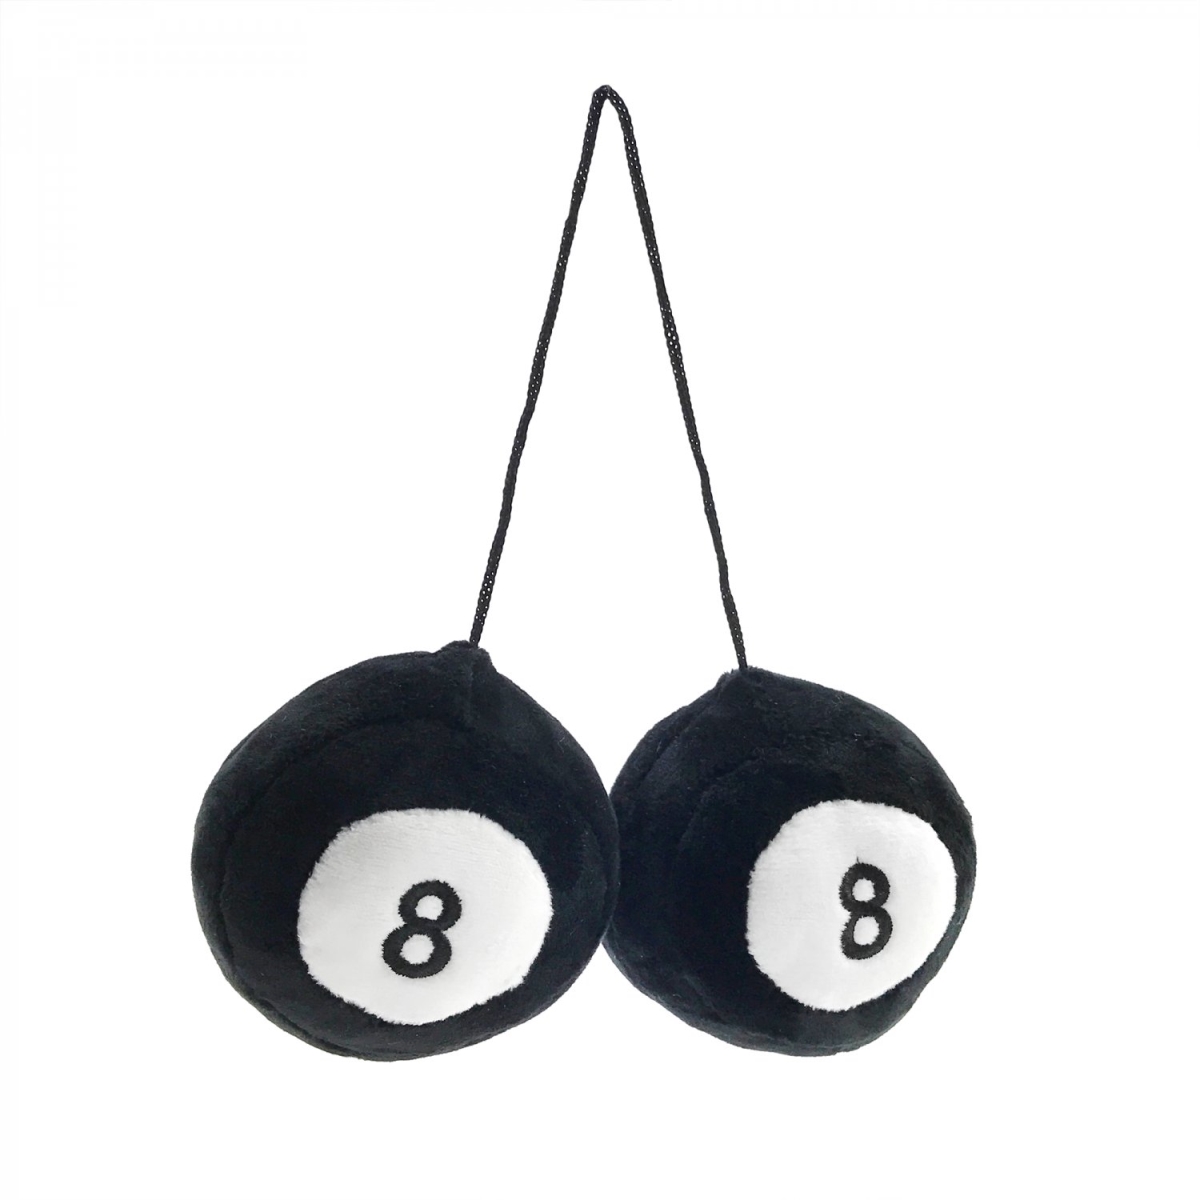 Picture of Vintage Parts USA 785538 3 Plush Stuffed Billiard 8-Ball Toys - Set of 2